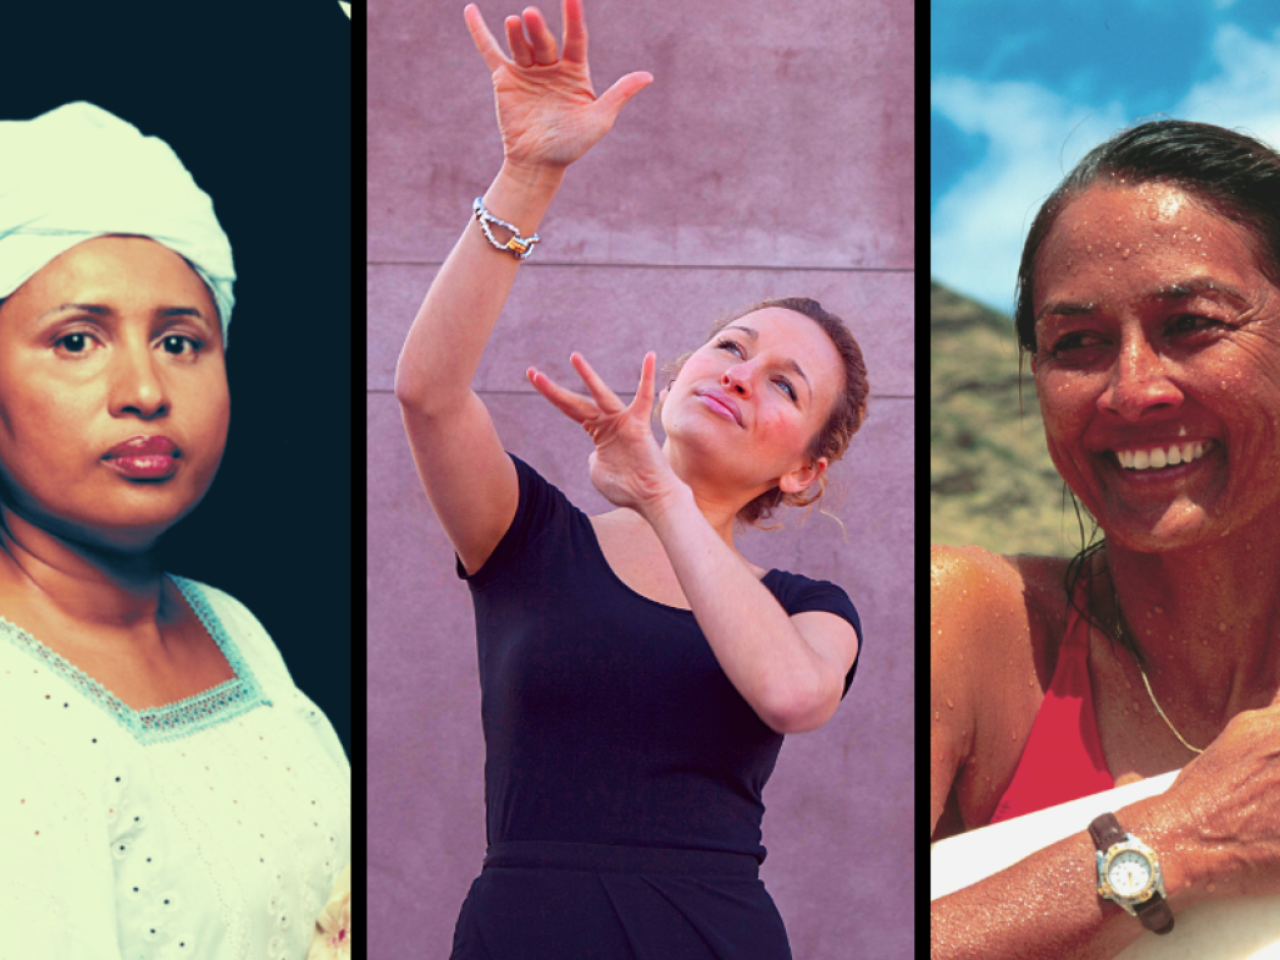 portraits of 3 women. An African woman wearing a white headdress and white blouse, an Israeli woman with her hands raised up wearing a black top, and a Hawaiian woman with water drops on her face holding a surfboard